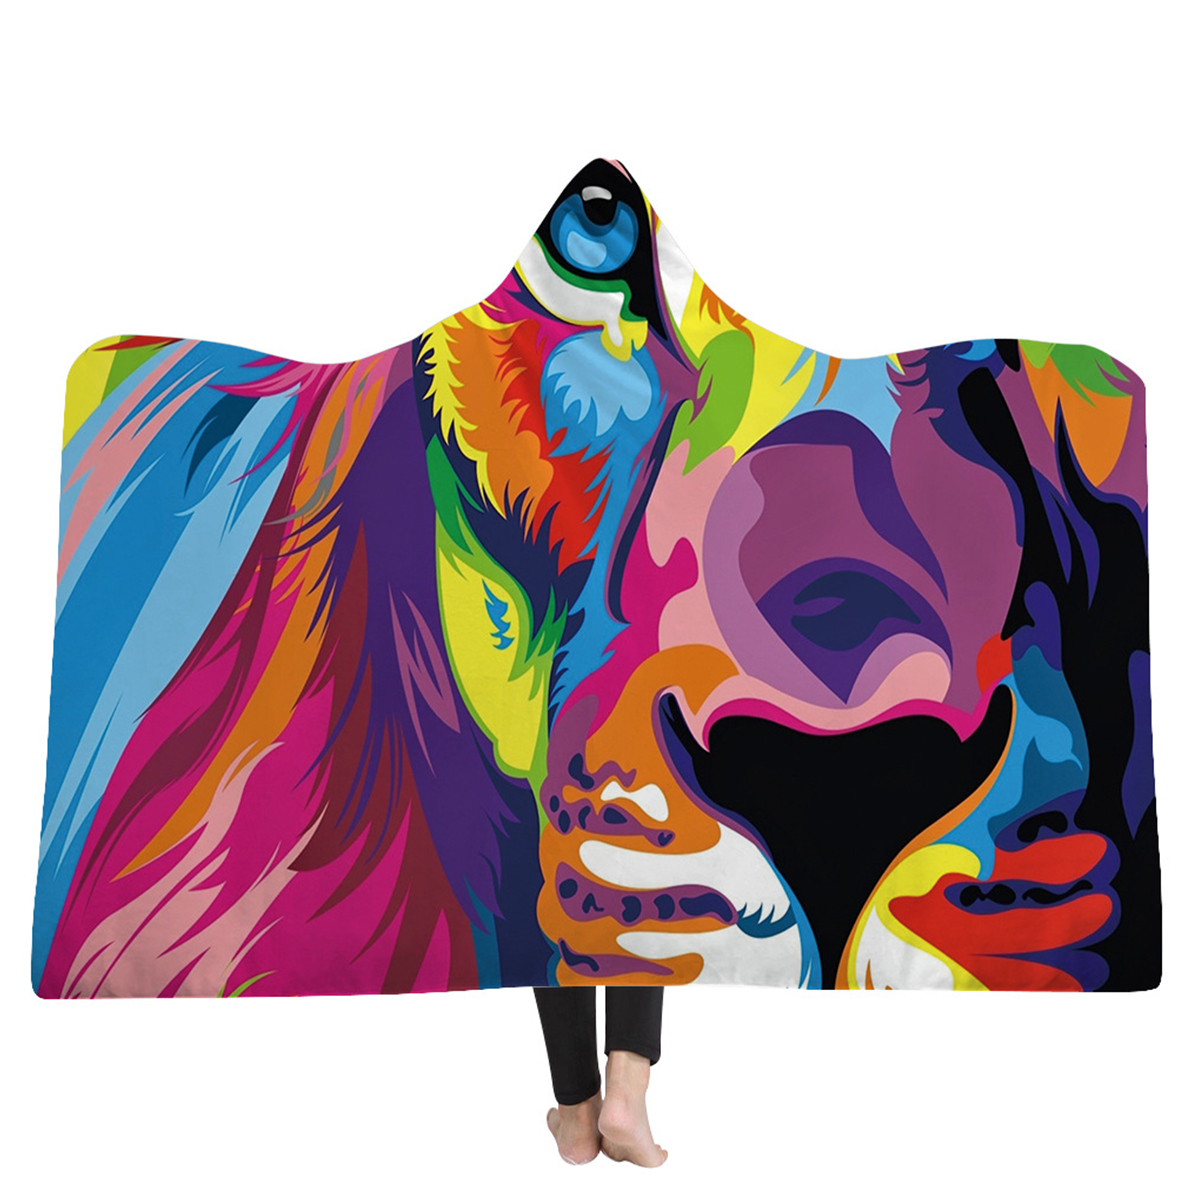 Hooded-Blankets-Lion-Colorful-Printed-Warm-Wearable-Plush-Mat-Thick-Nap-Soft-Blanke-1400297-1